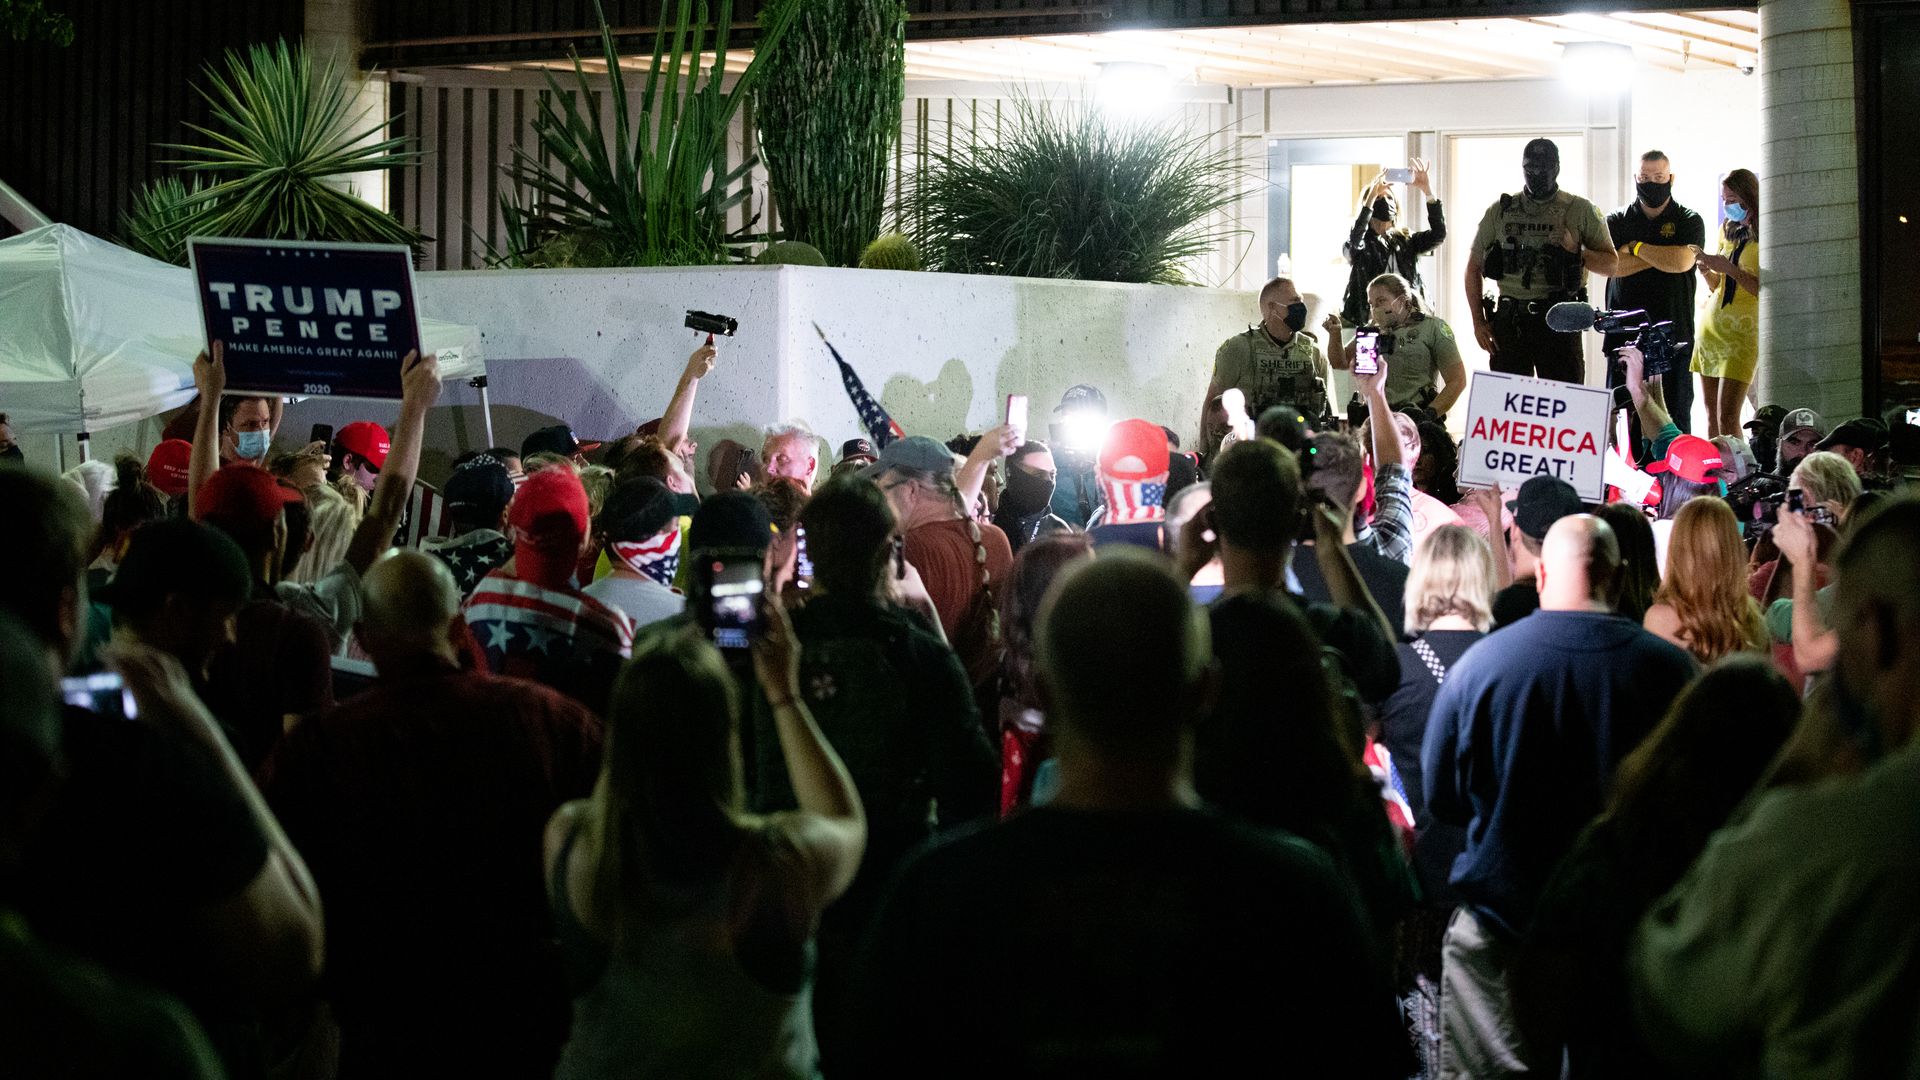 Trump supporters gather to protest the election results at the Maricopa County Elections Department office on November 4, 2020 in Phoenix, Arizona.